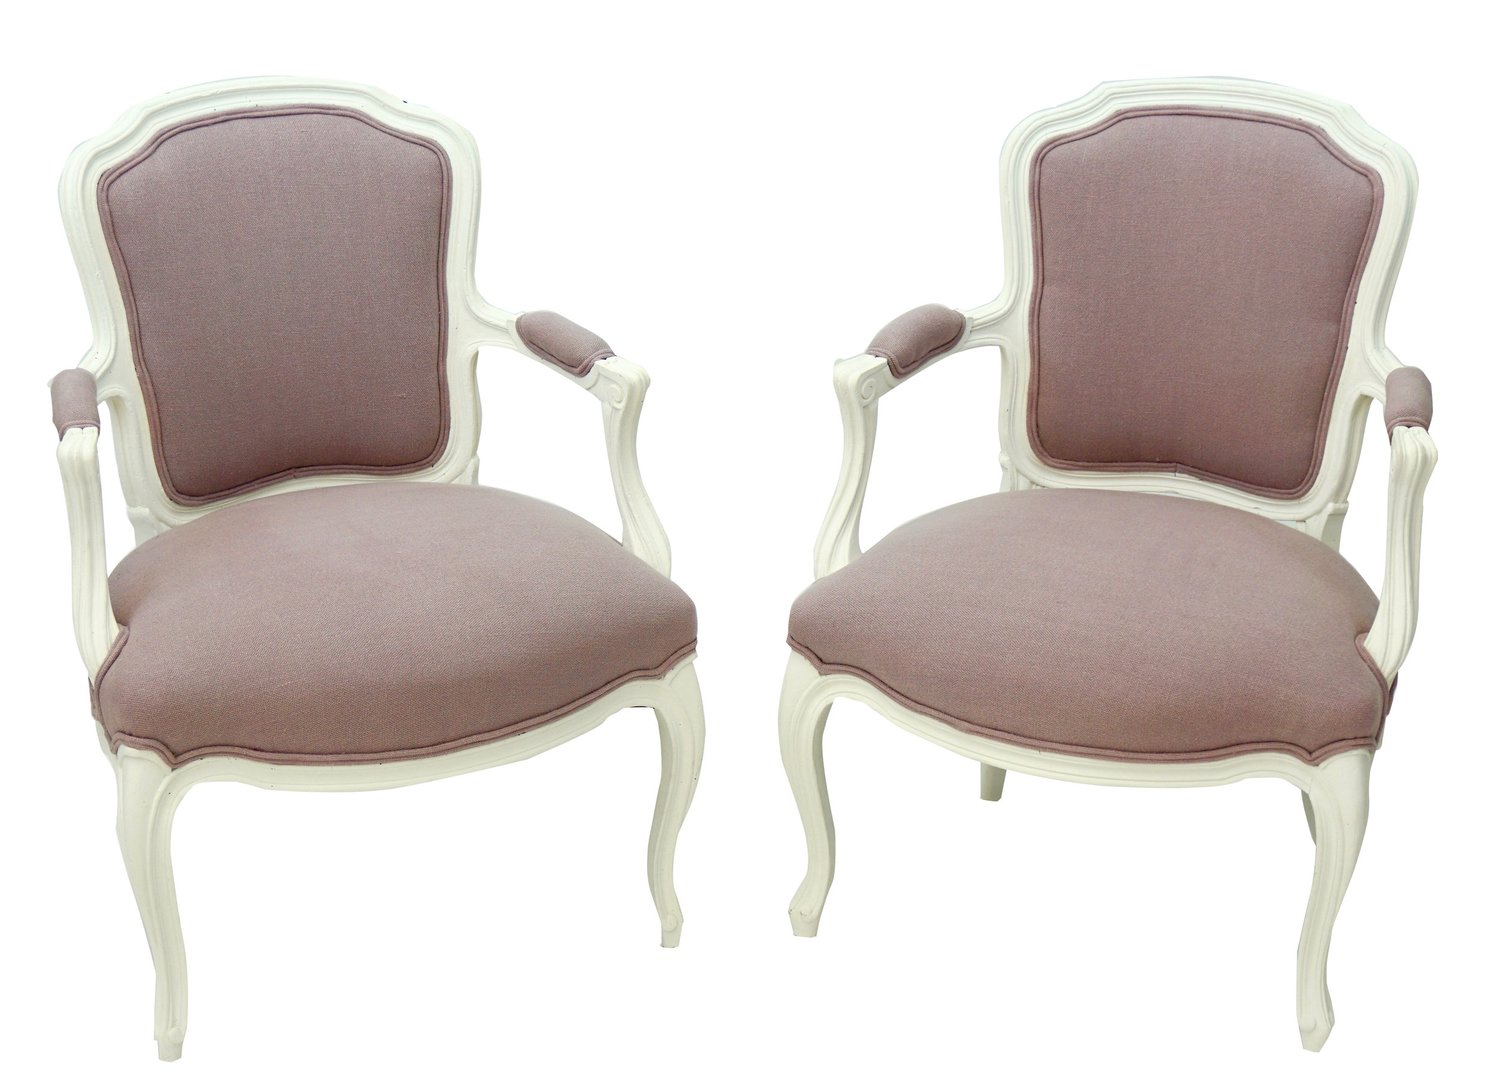 Vintage French Louis Xv Style Armchairs, Vintage Louis Xv Chairs